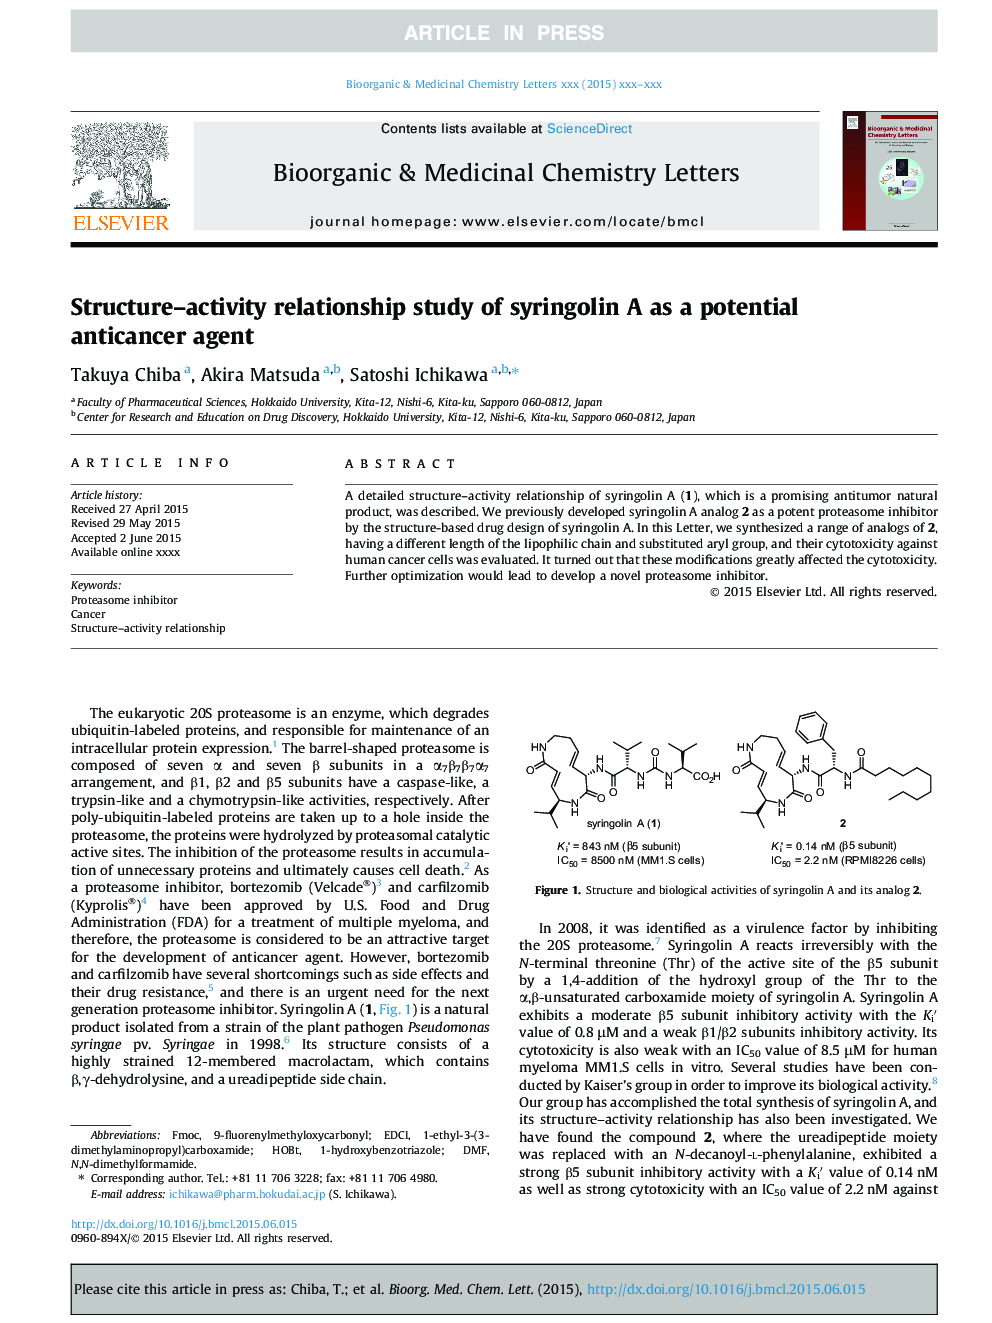 Structure-activity relationship study of syringolin A as a potential anticancer agent